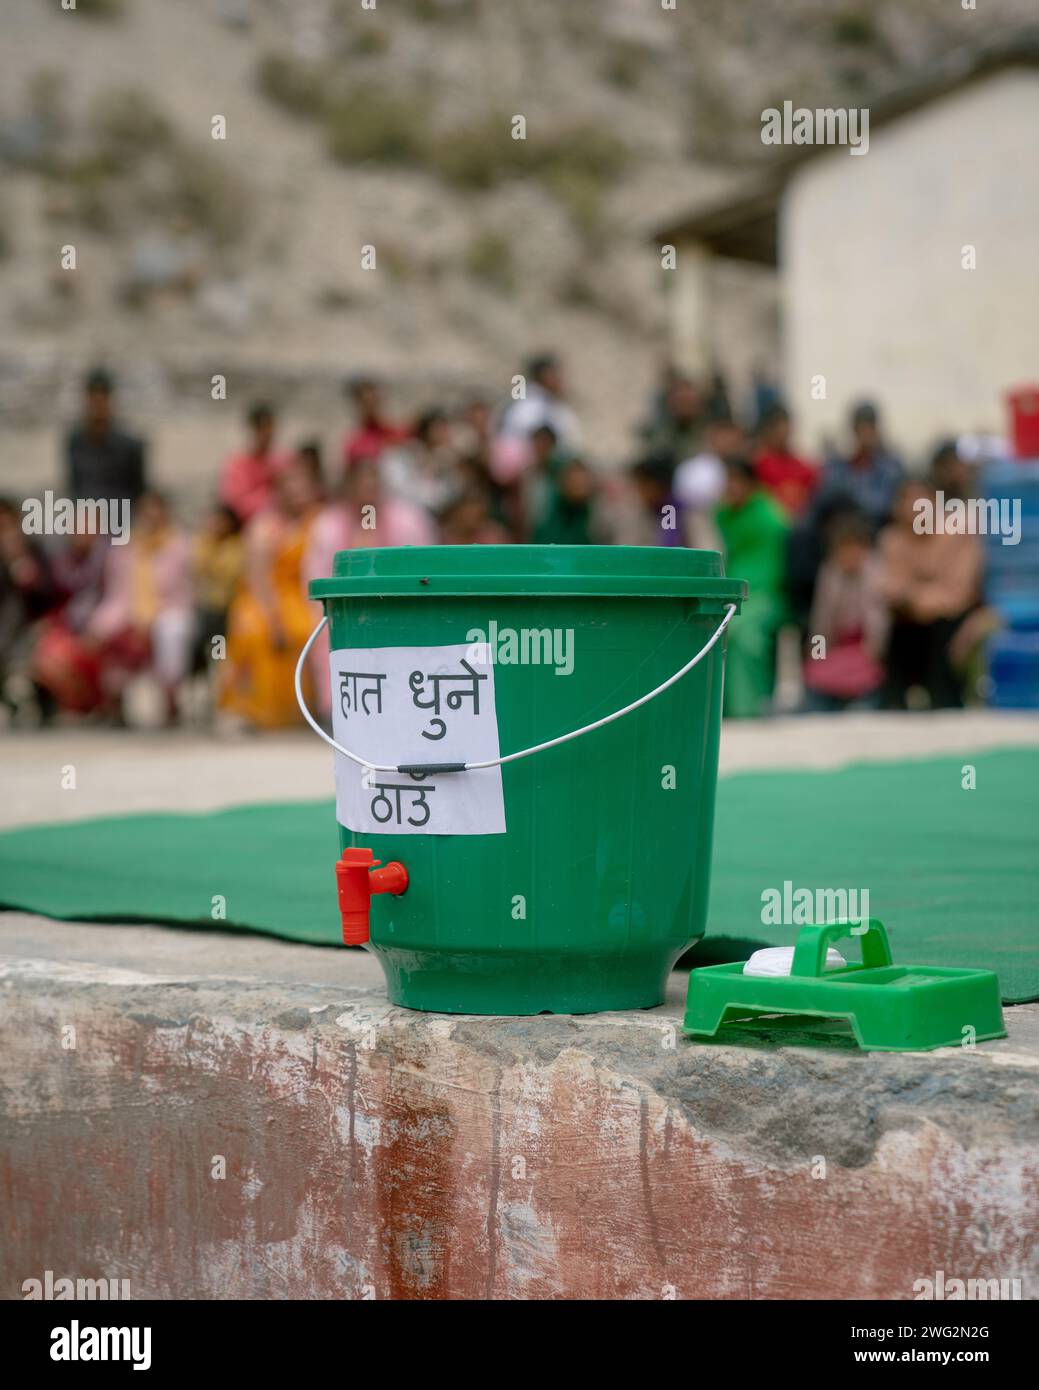 Plastic water dispenser provides clean water to a community event in Palata, Dolpa District, Western Nepal, 2023. Stock Photo